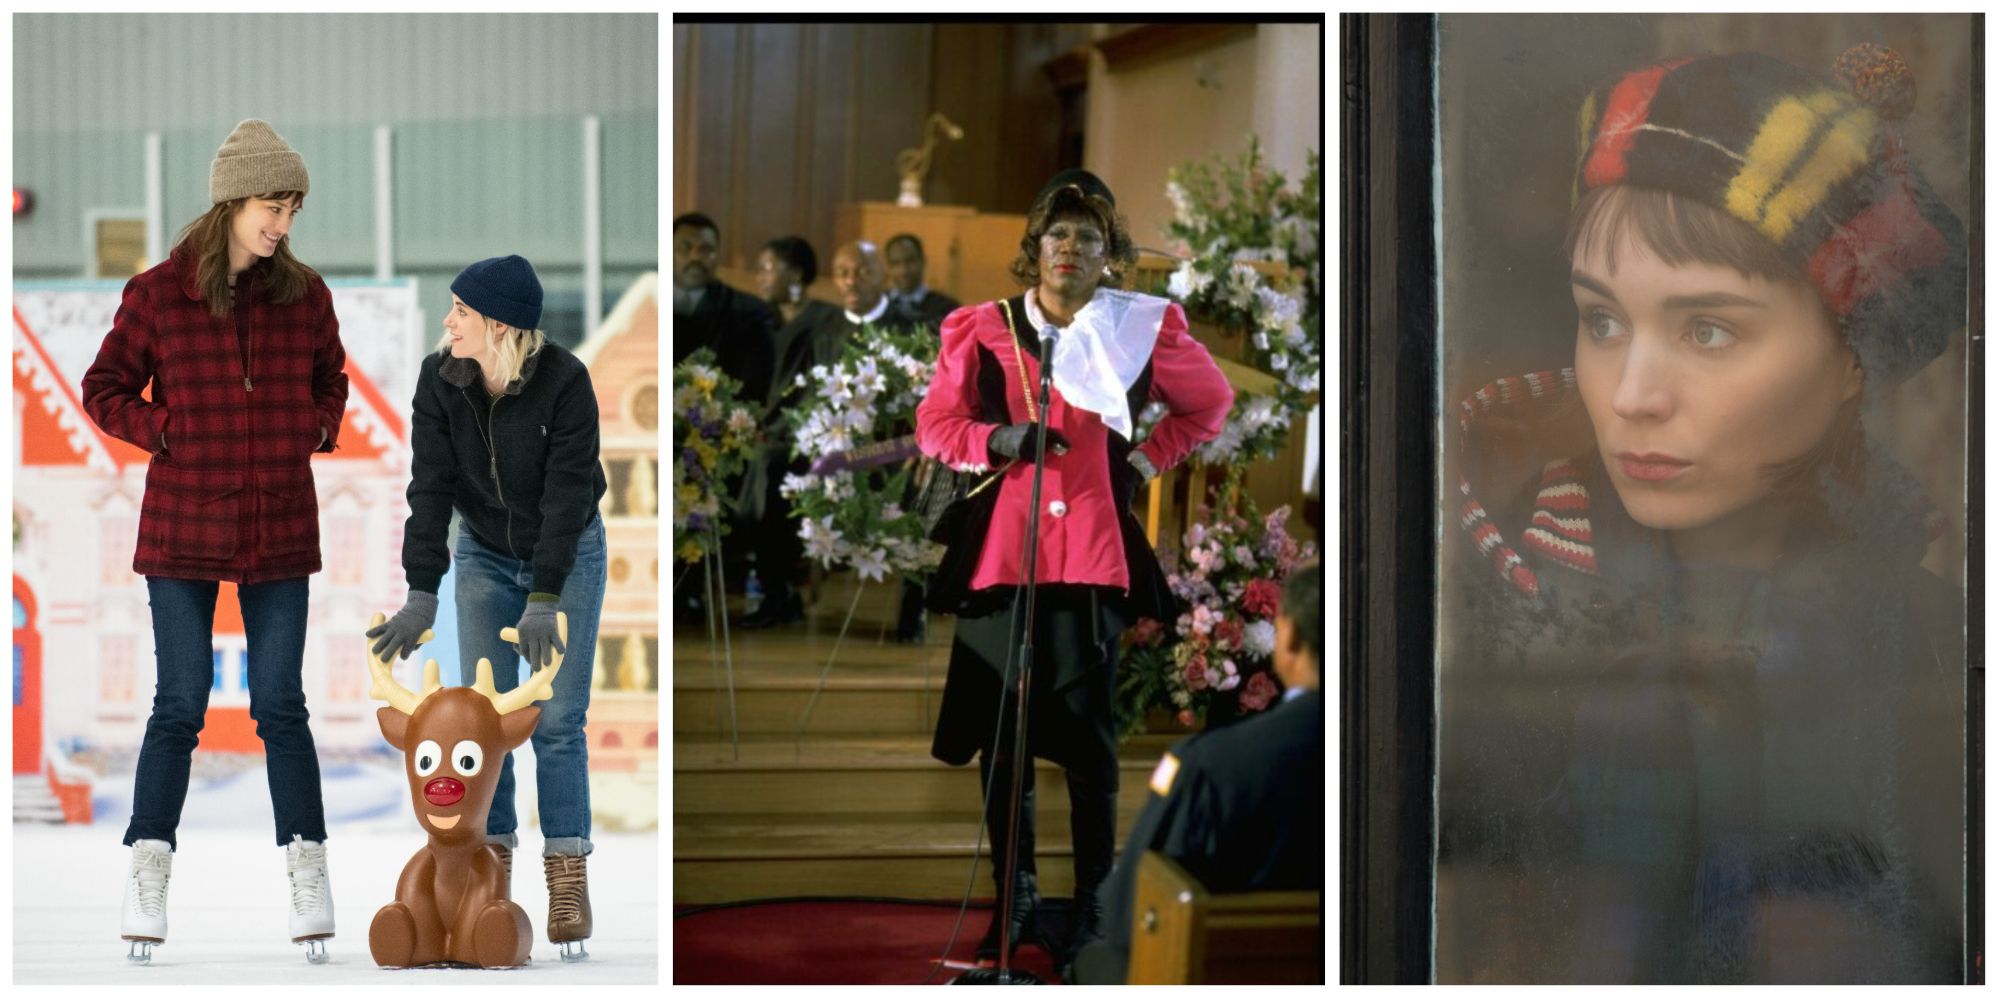 Left image Abby and Harper at an ice rink. Middle image Holiday in church. Right image Therese looking through a window at Carol.